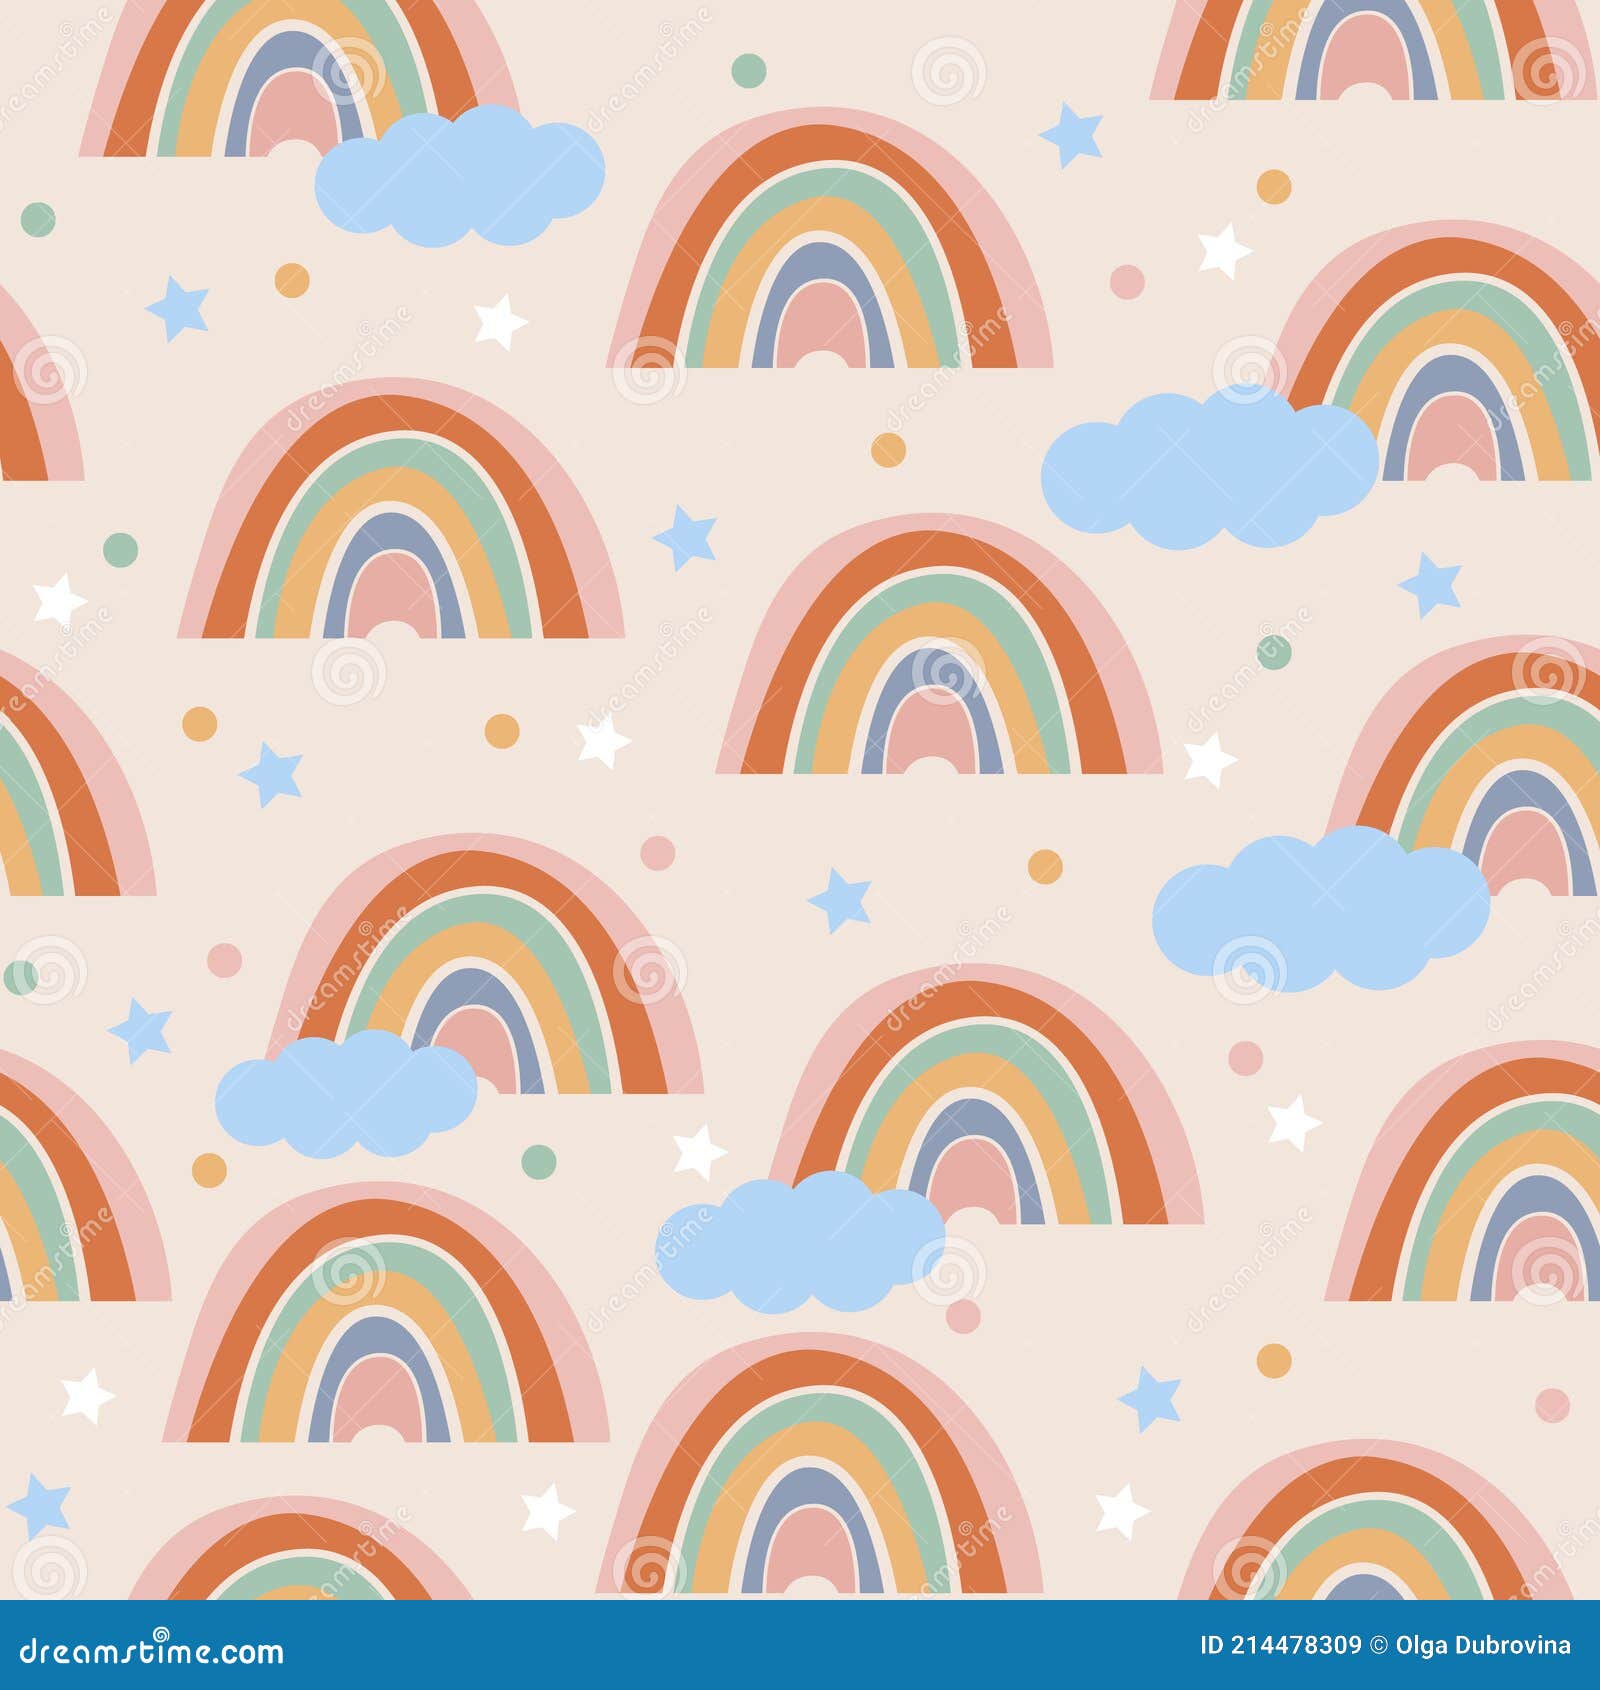 Minimalist Rainbow Seamless Repeat Pattern for Commercial Use